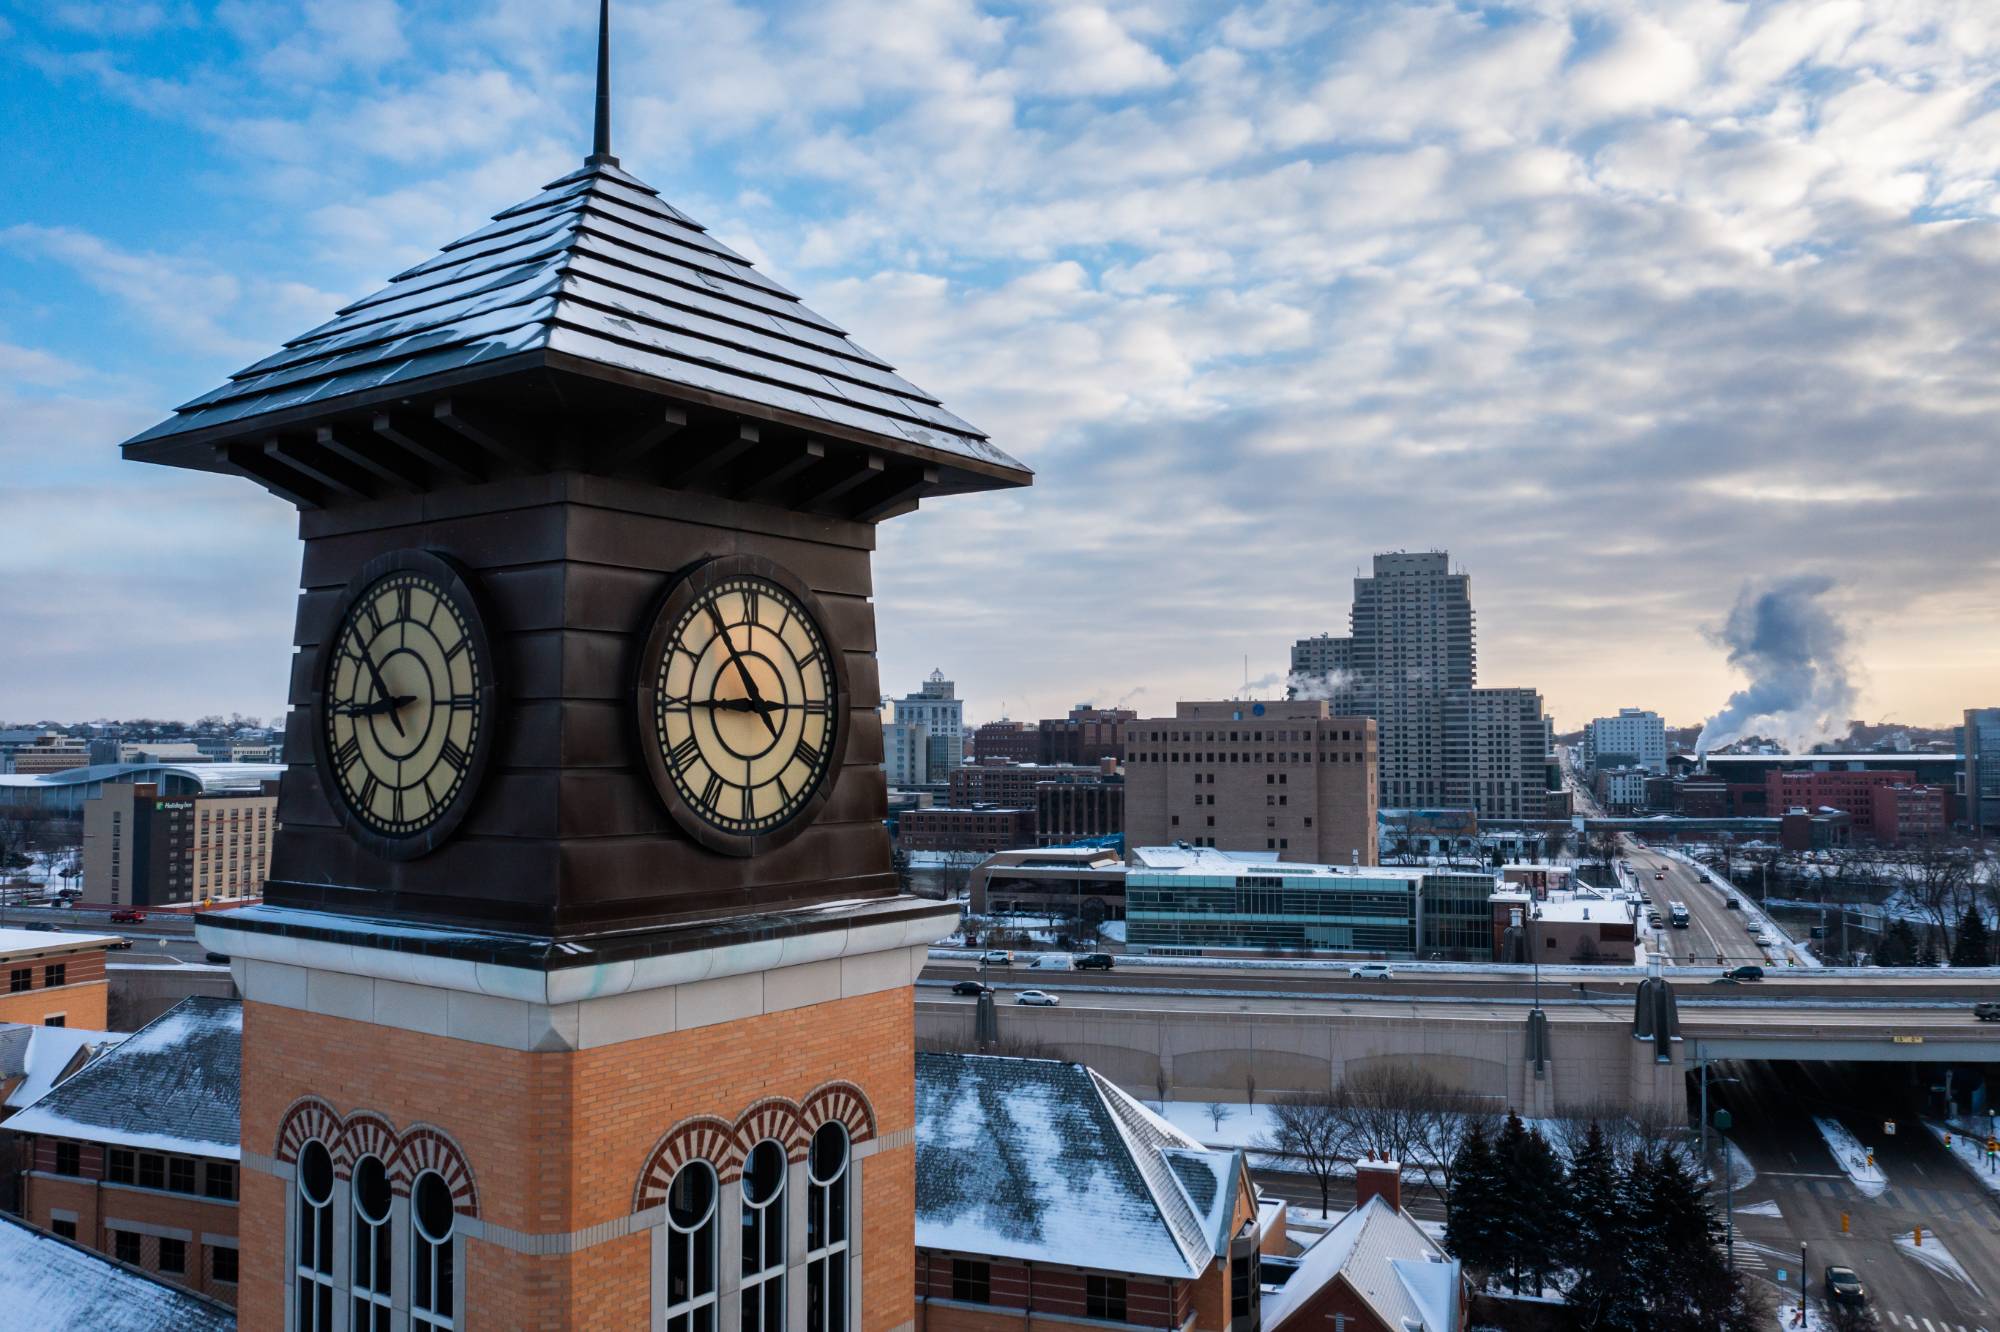 Clock tower in front of aerial view of downtown campus